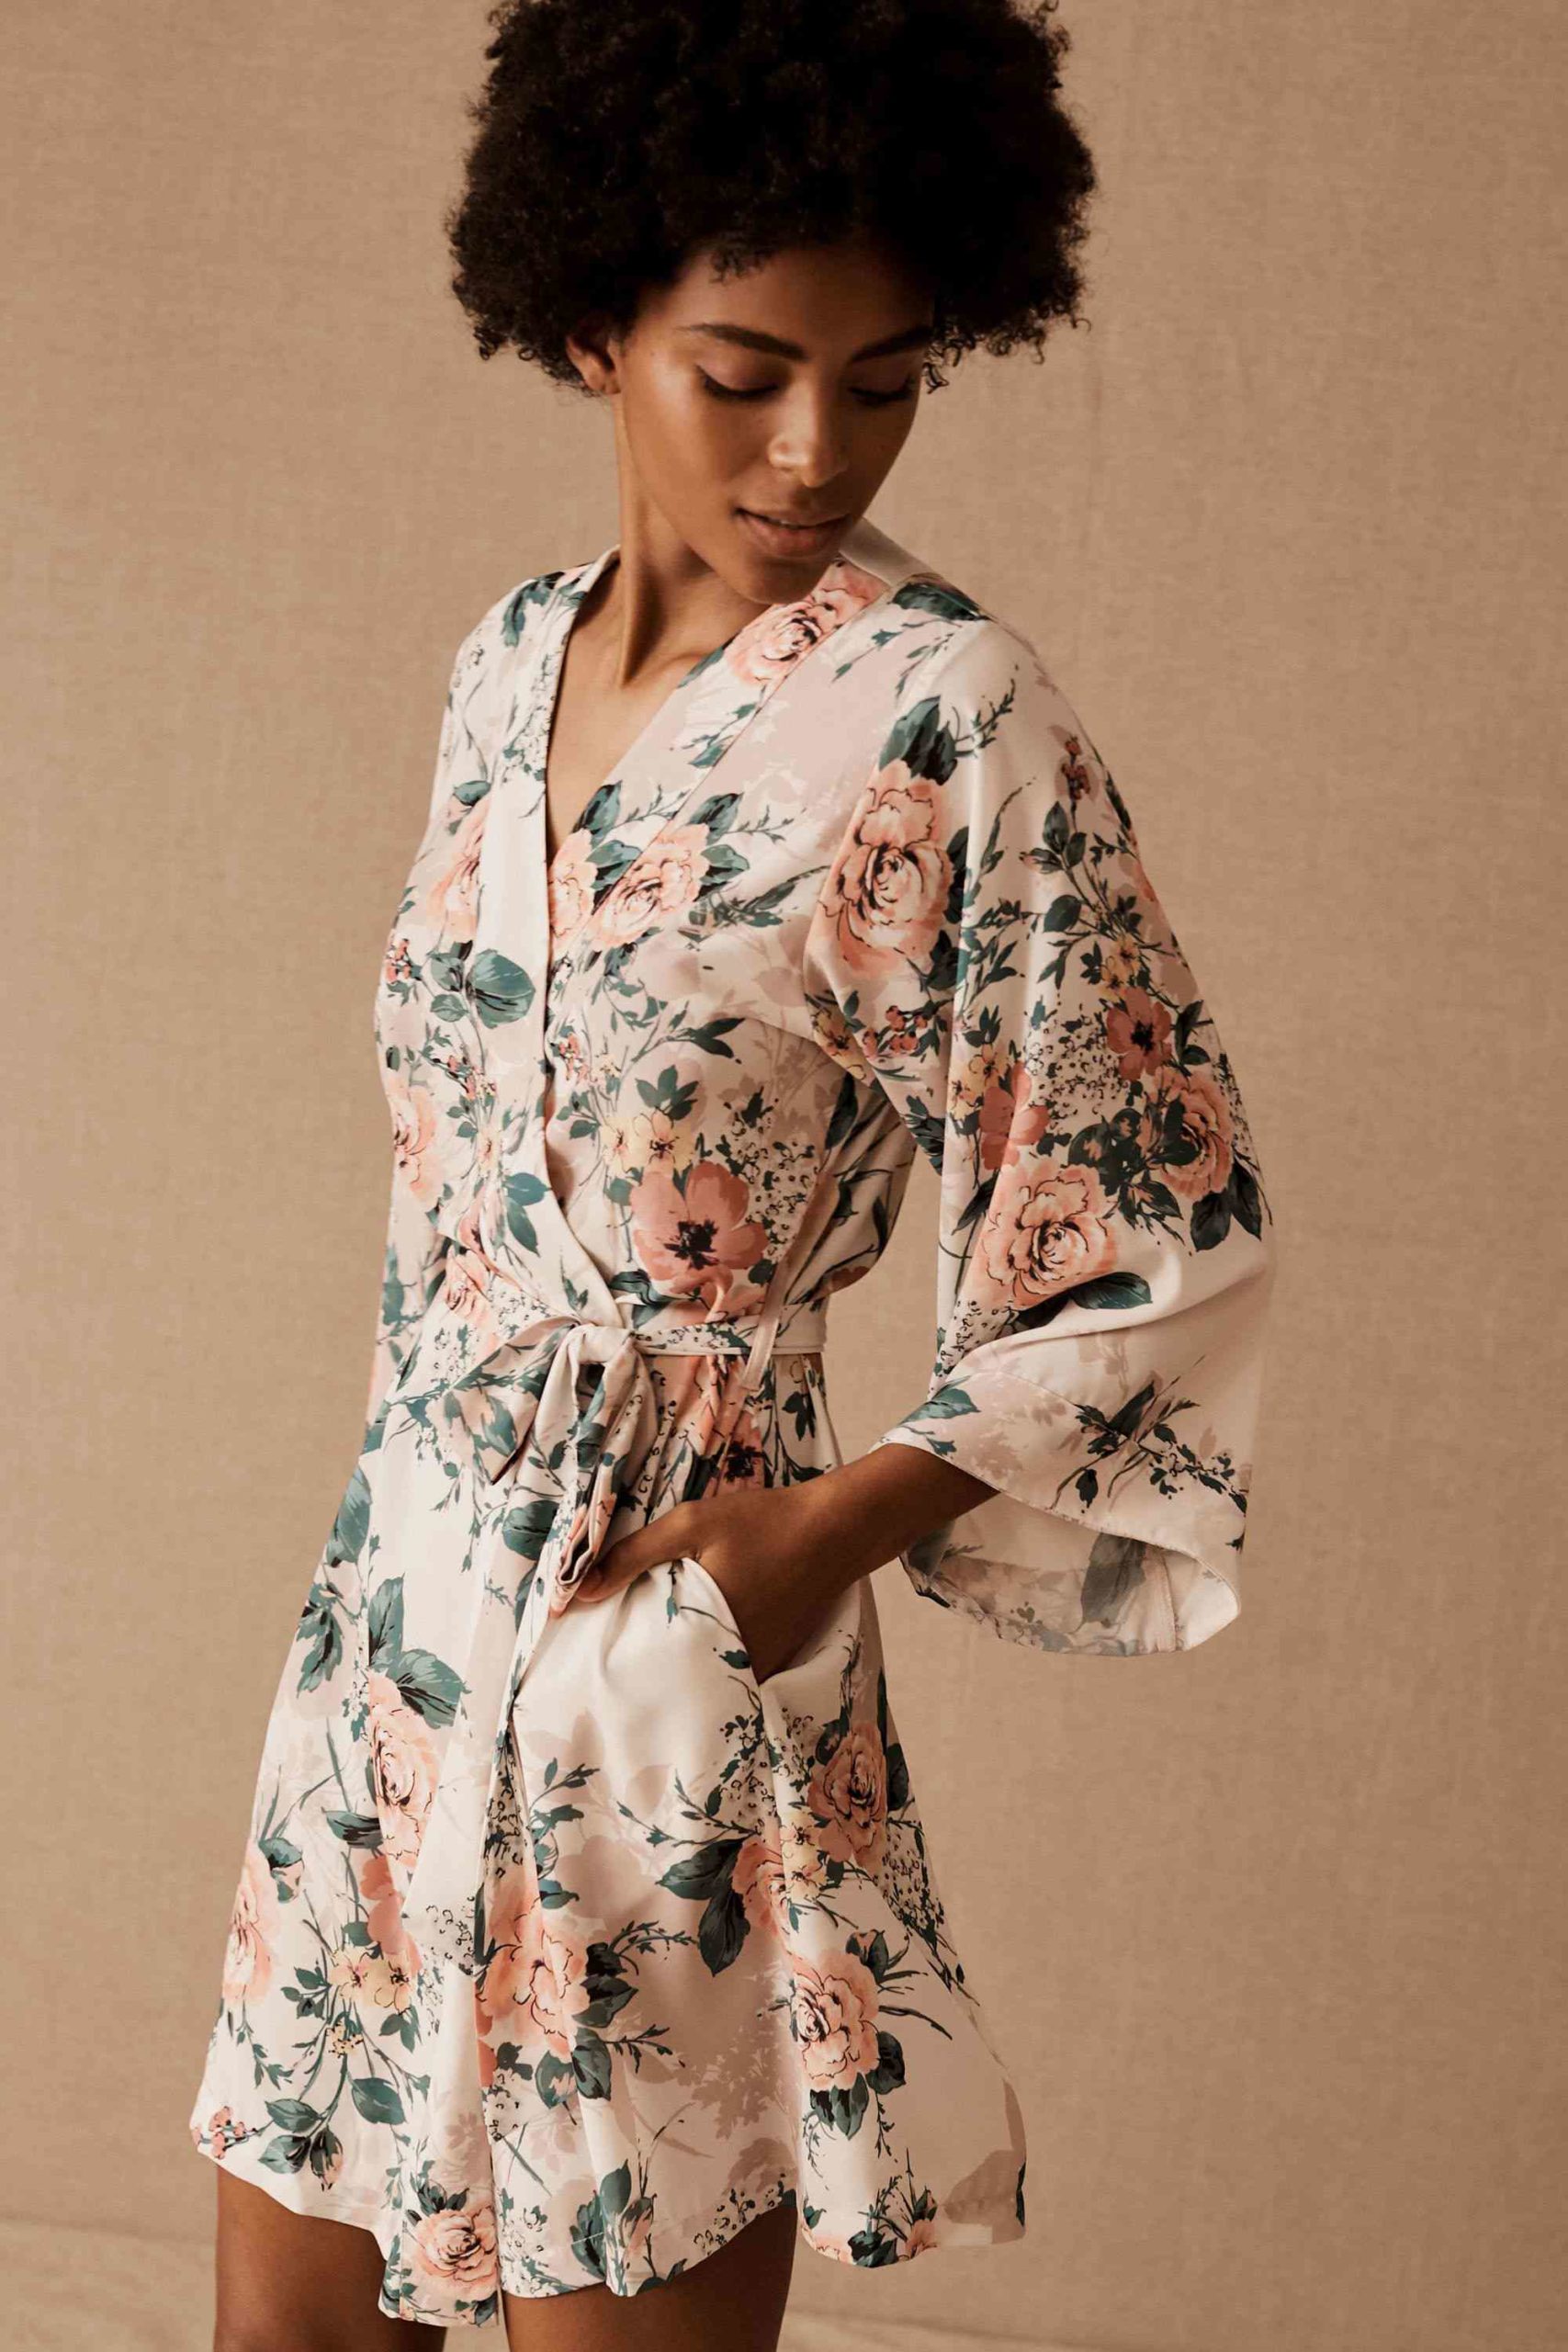 The Best Bridesmaid Robes For Your Bridal Party in 2020 4